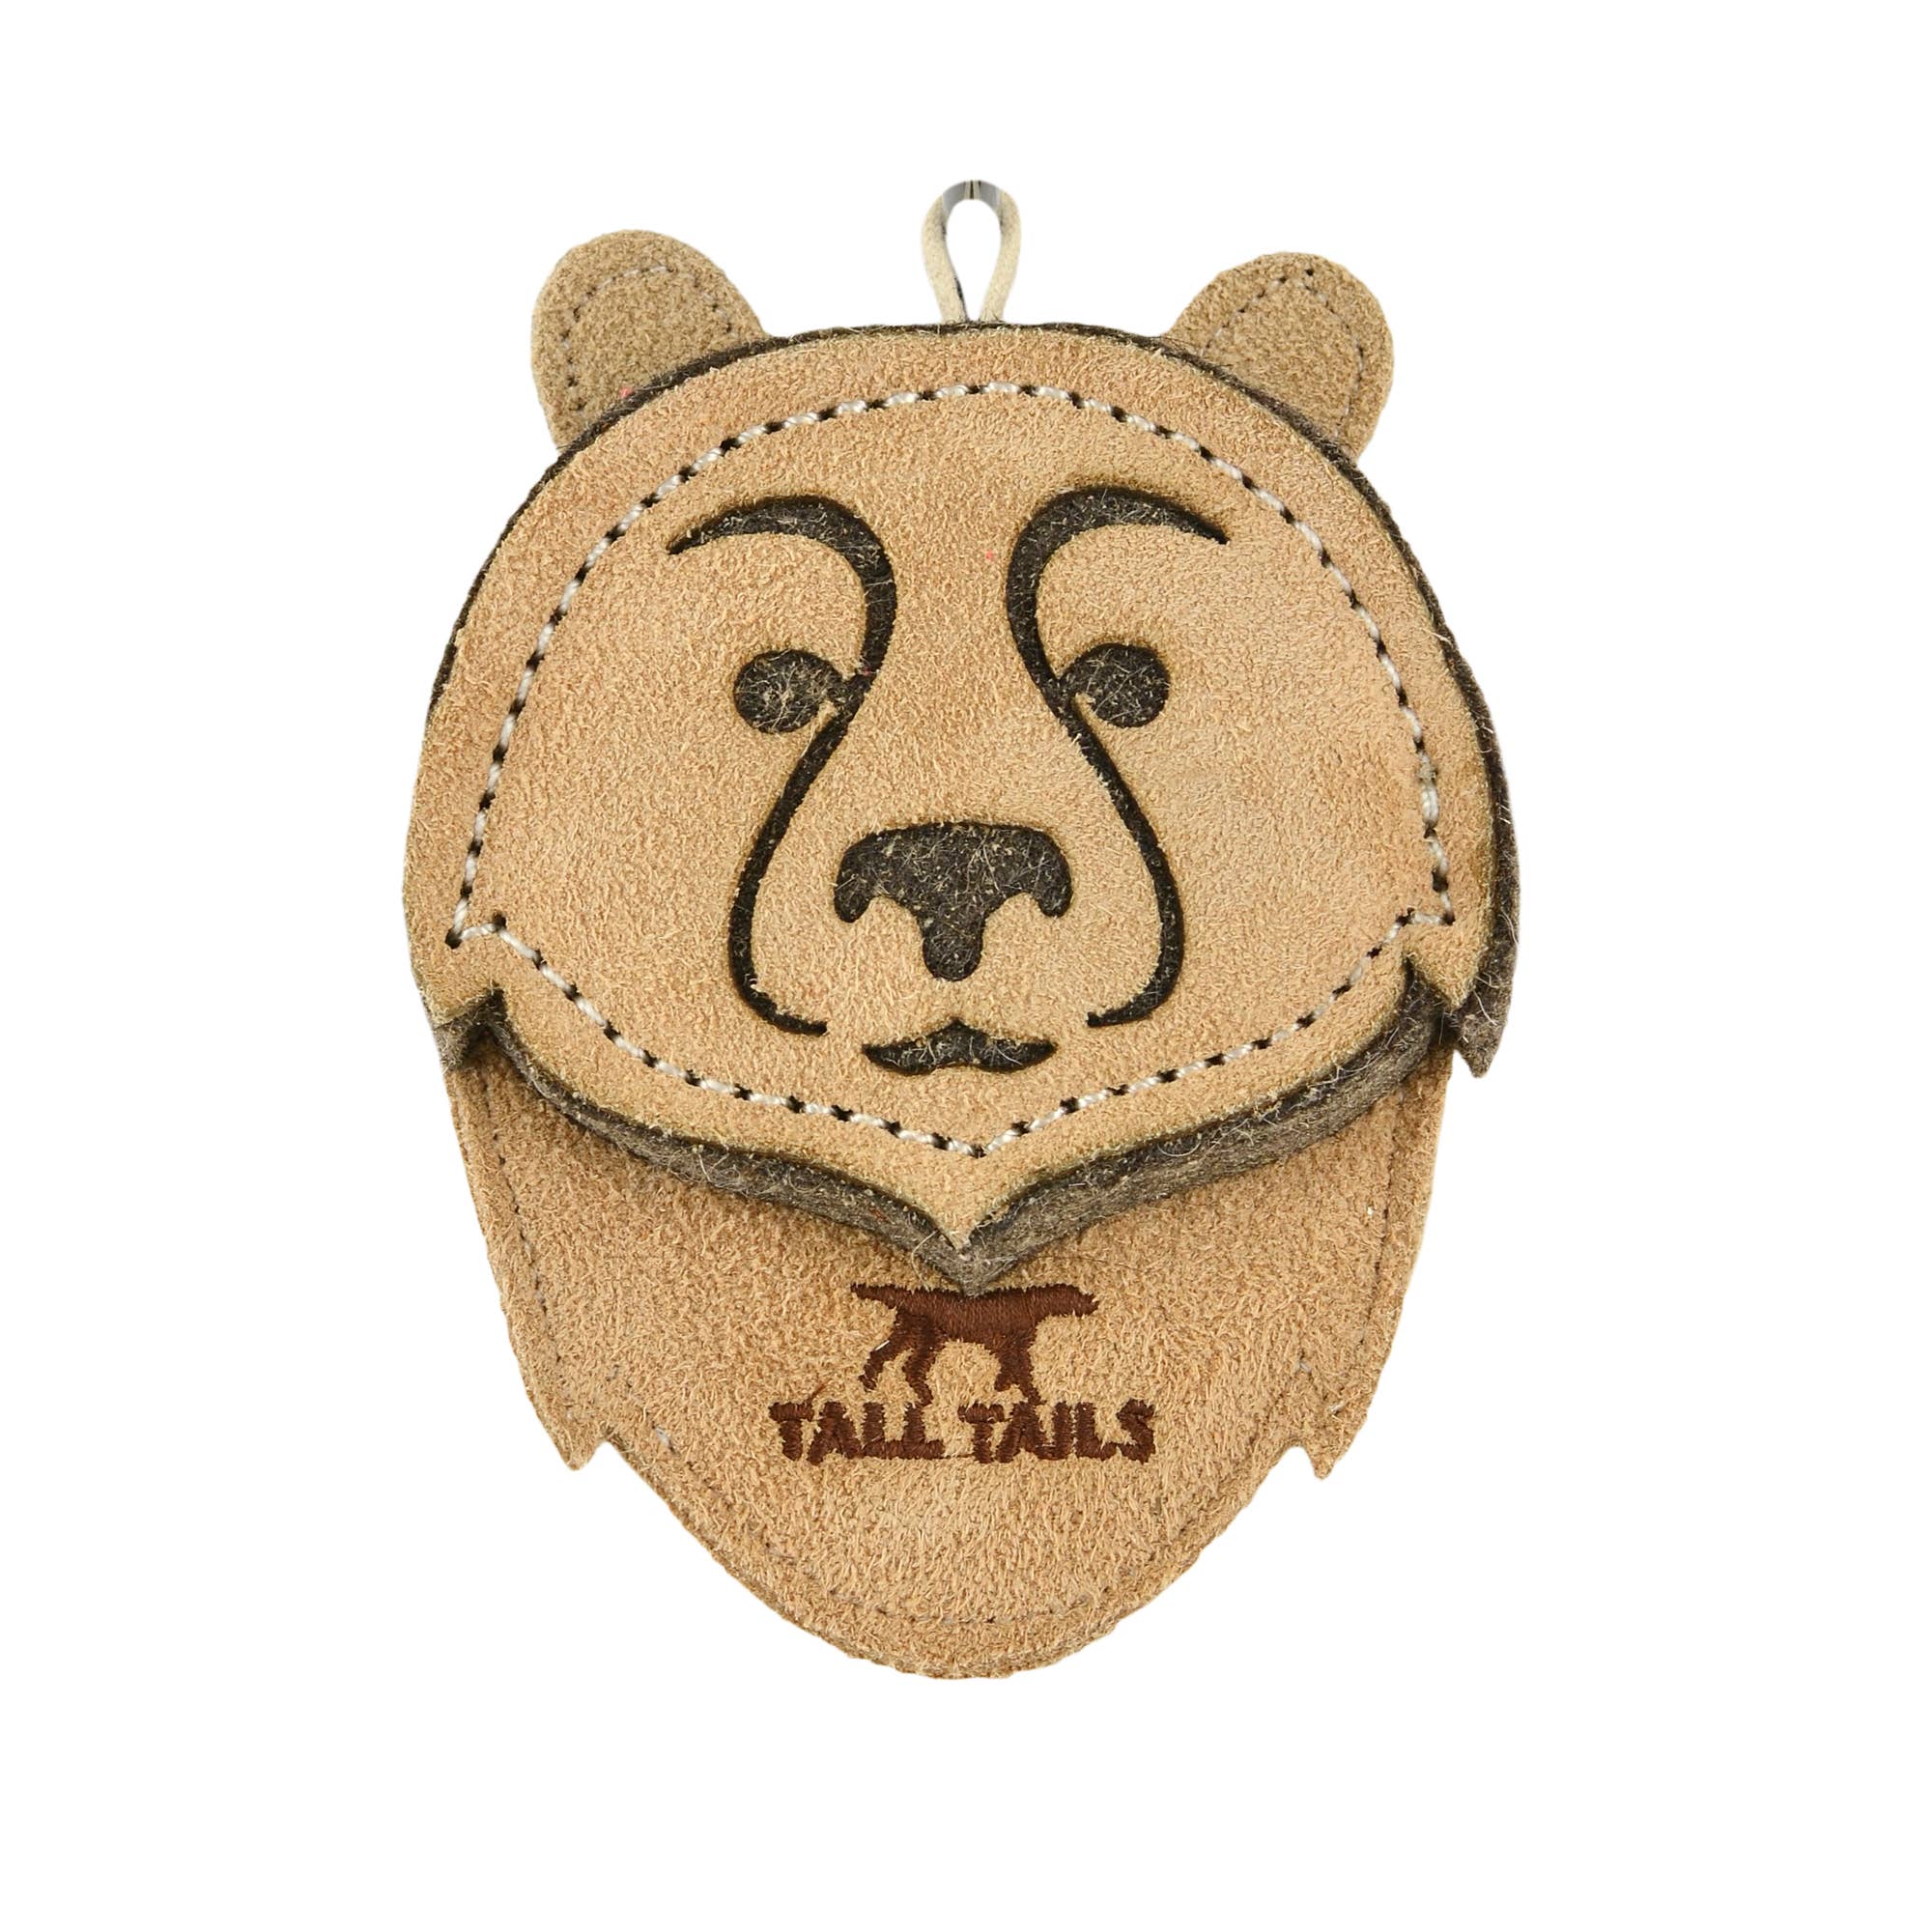 Tall Tails - 4" Natural Leather Bear Dog Toy